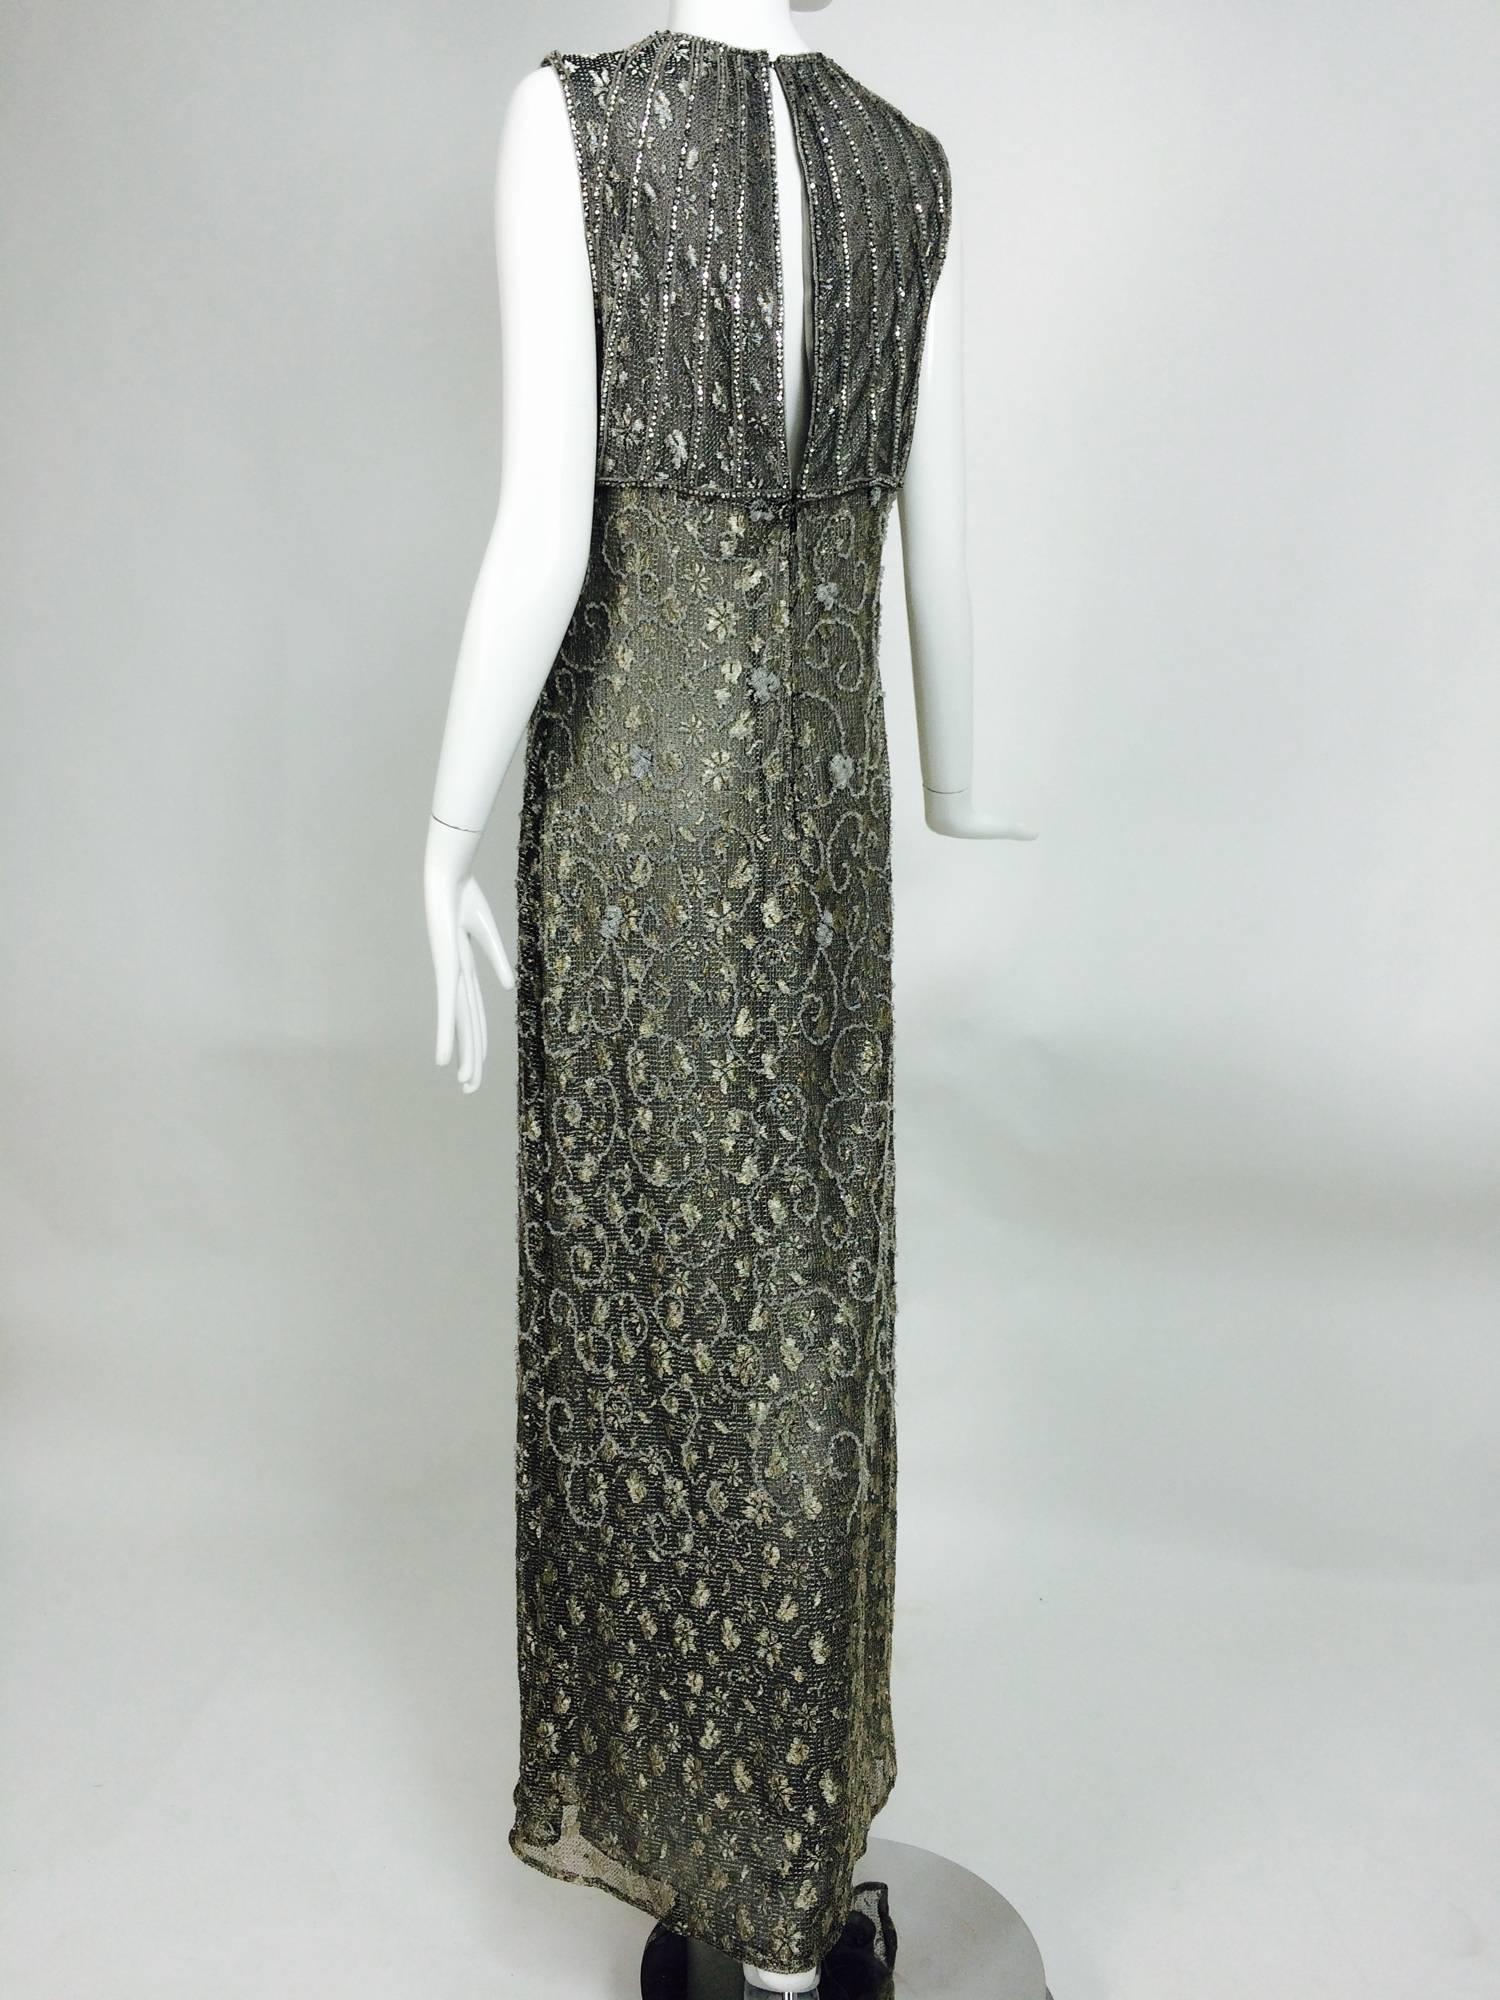 Women's Badgley Mischka embroidered & beaded silver metallic lace gown